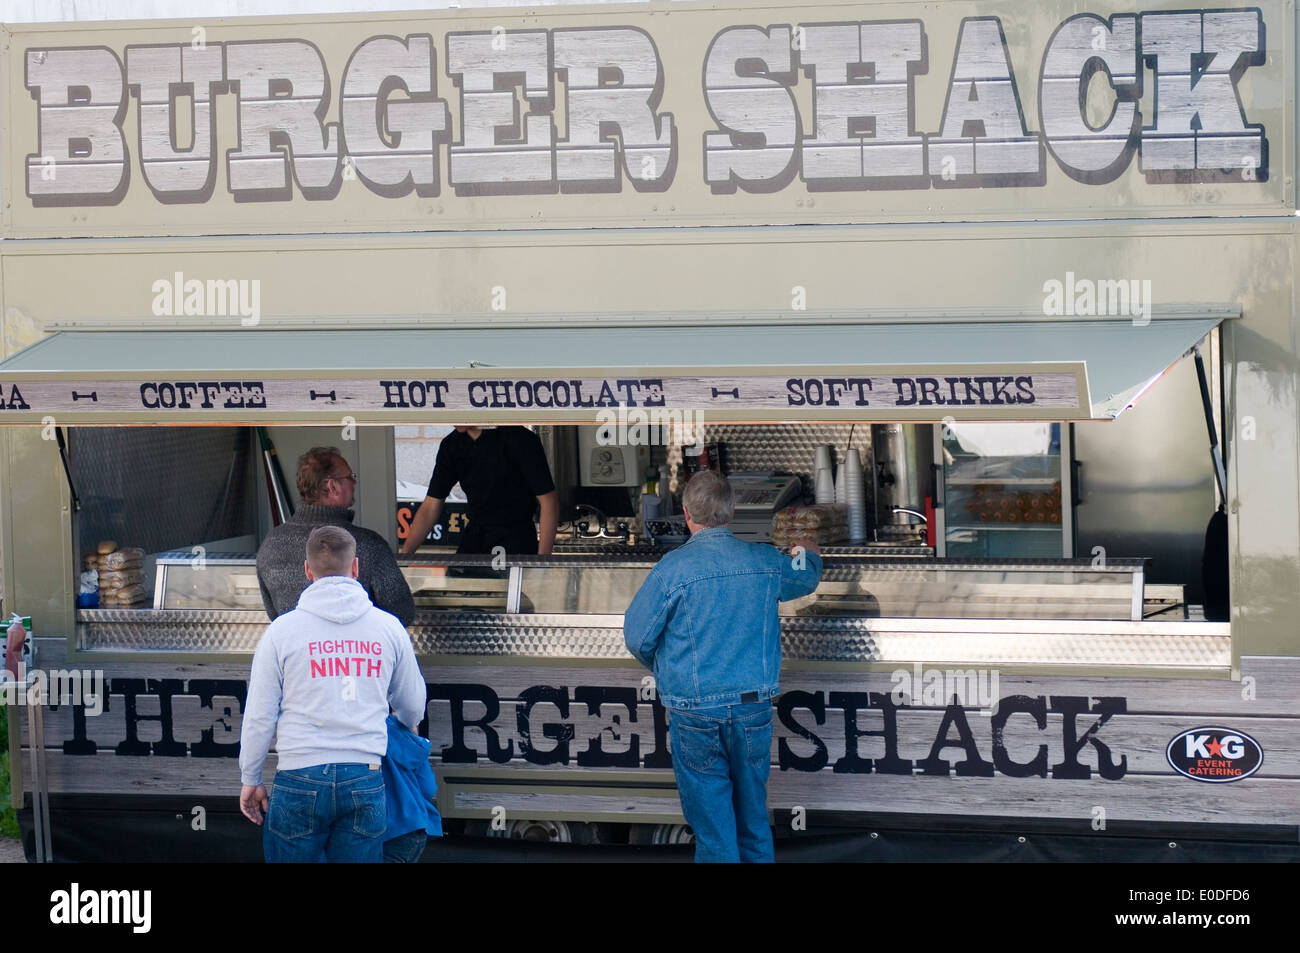 burger van vans burgers food fast catering trailer trailers event events  Stock Photo - Alamy